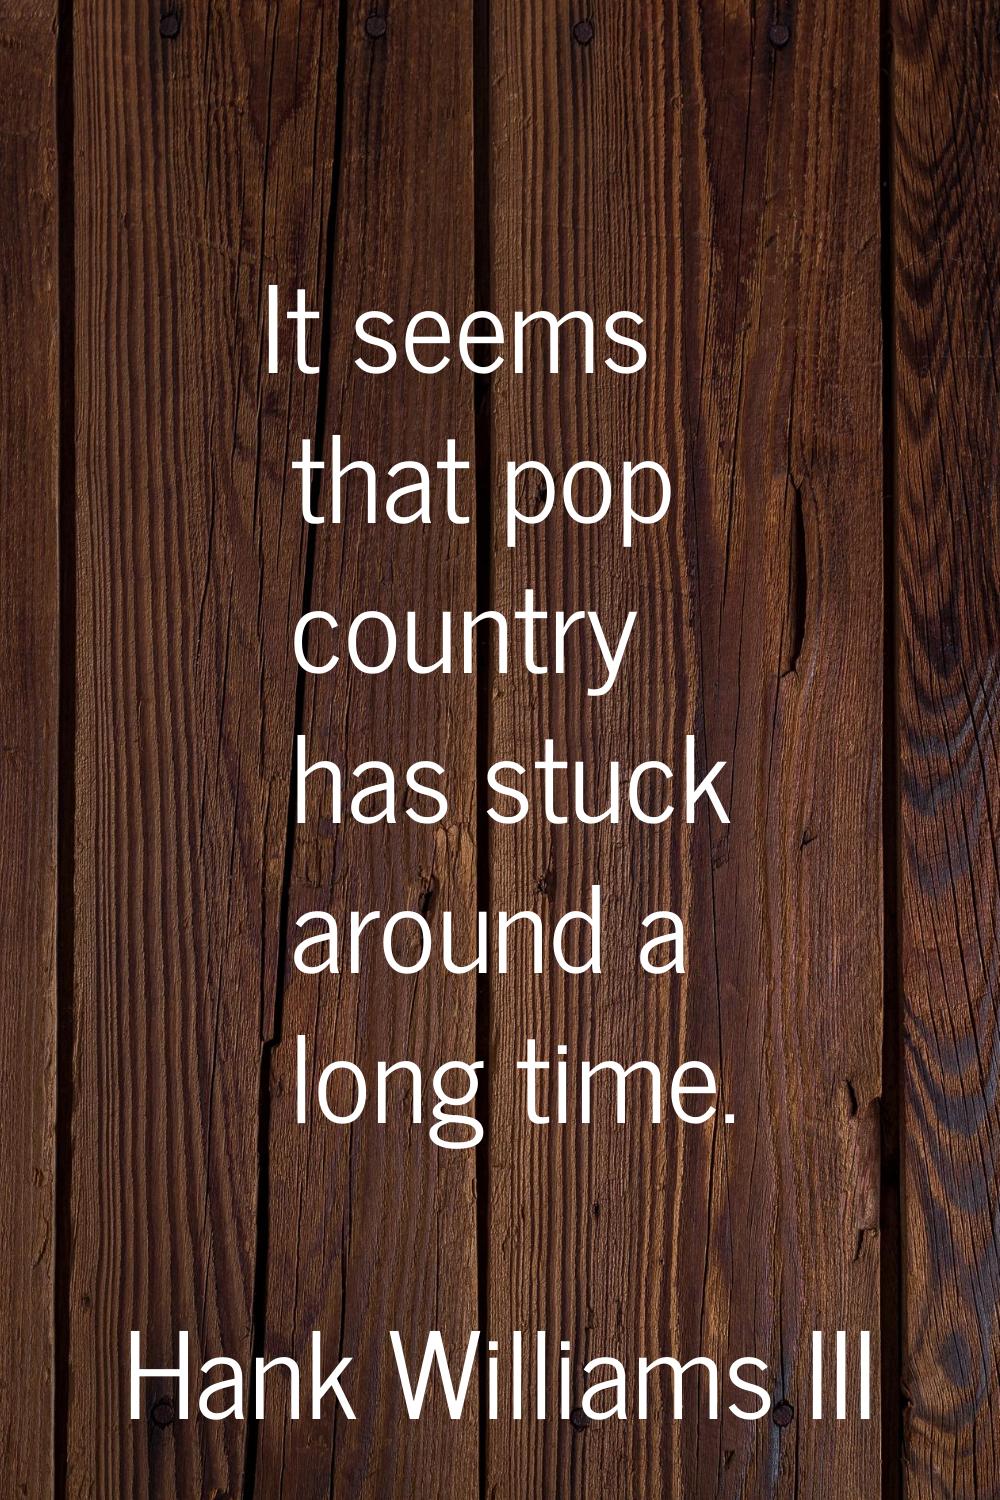 It seems that pop country has stuck around a long time.